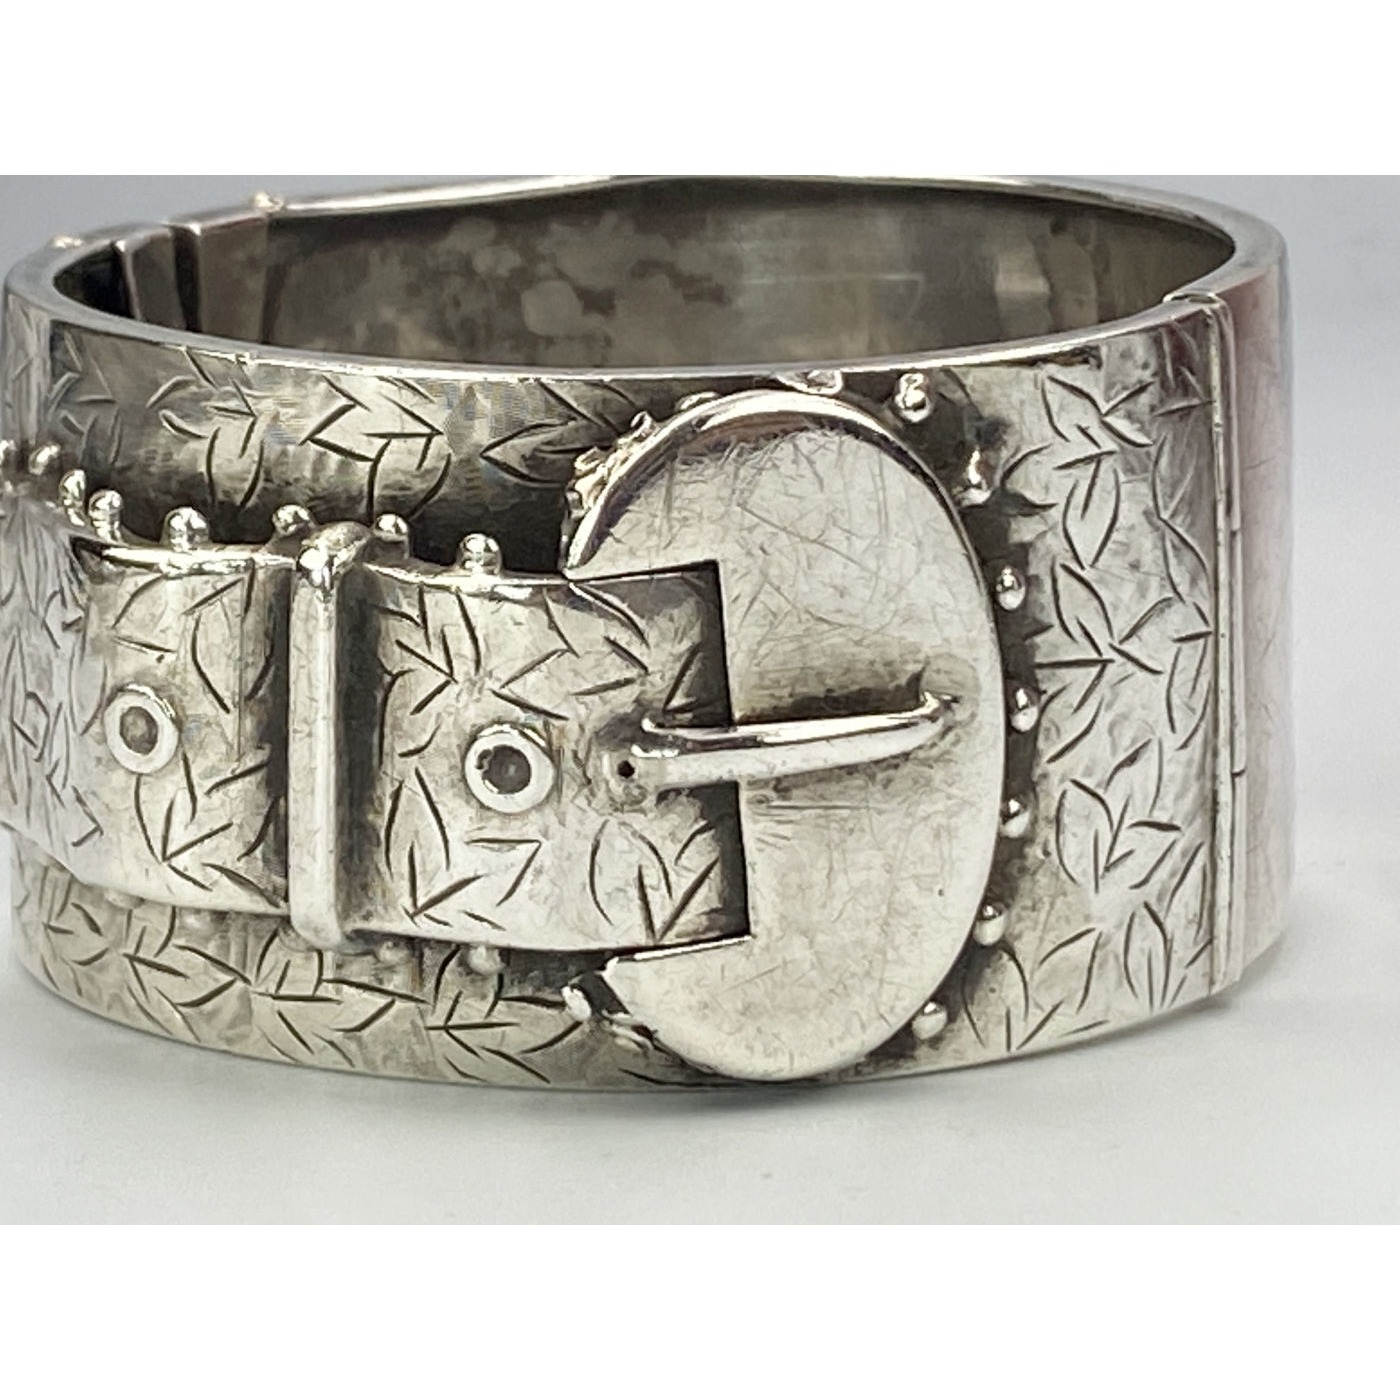 Buy Antique Buckle Bracelet, Sterling, Engraved, Aesthetic Movement, Arts  Crafts Online in India - Etsy